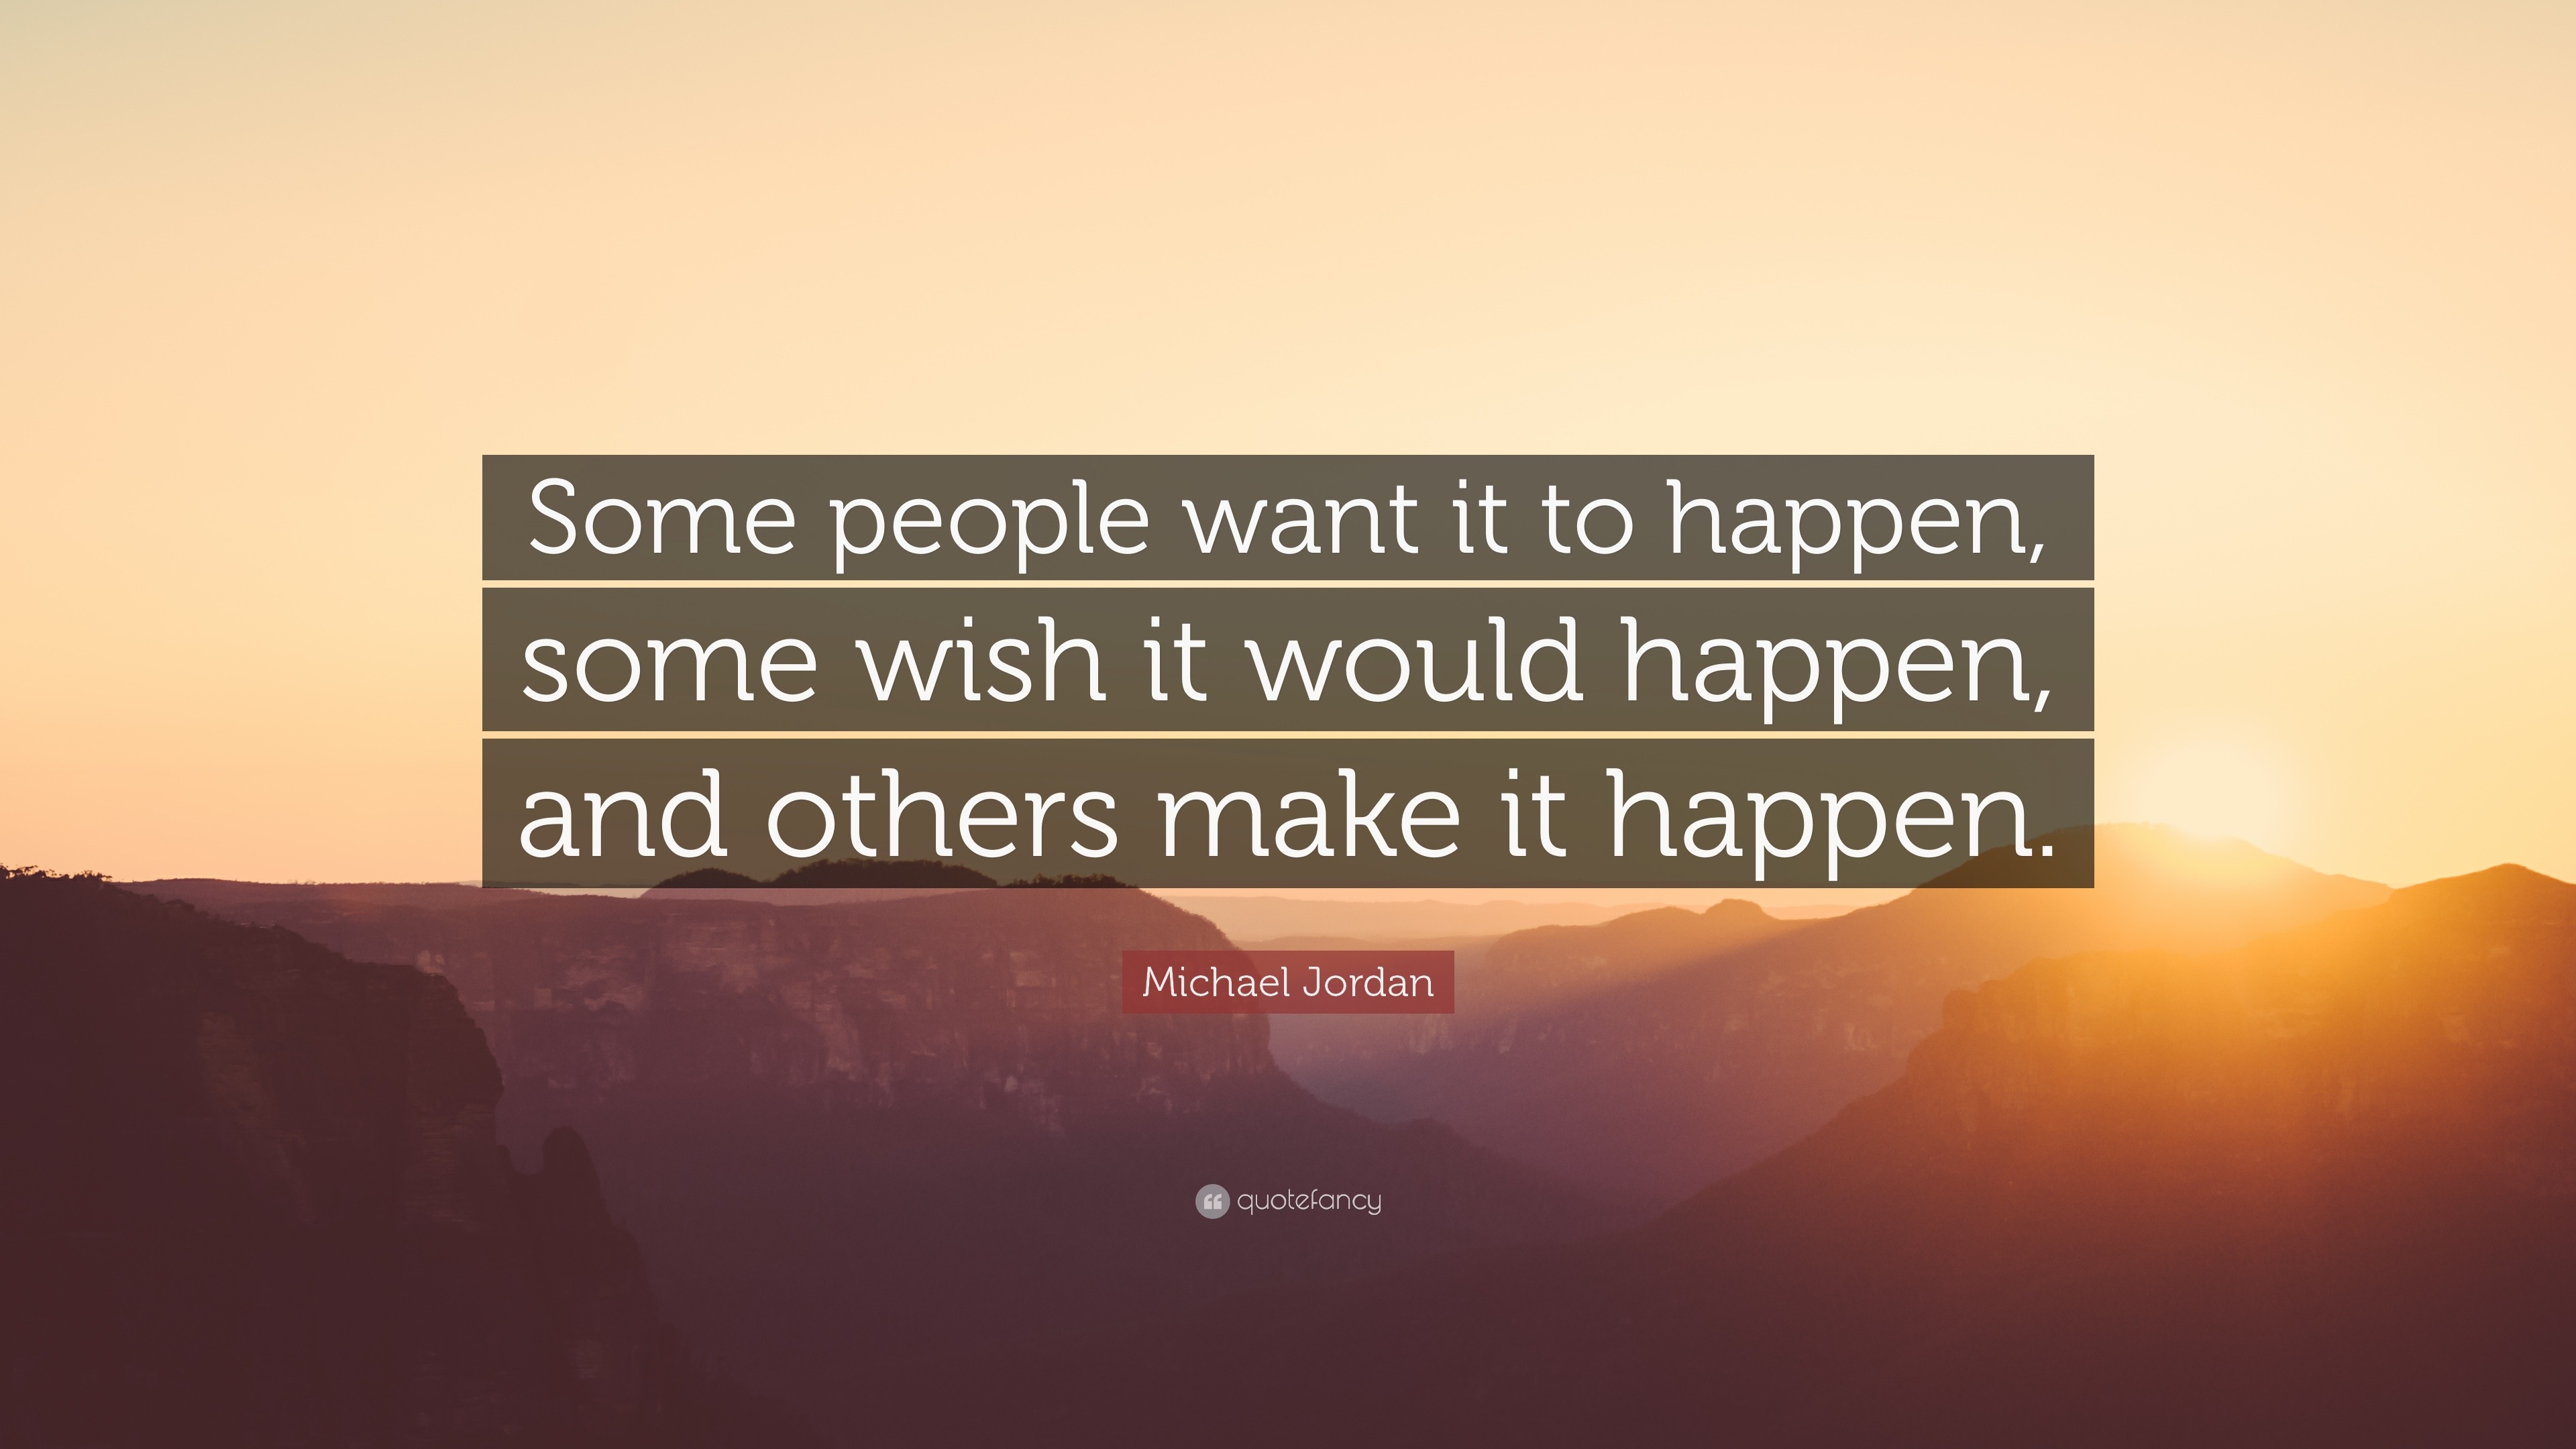 Michael Jordan Quote: “Some people want it to happen, some wish it